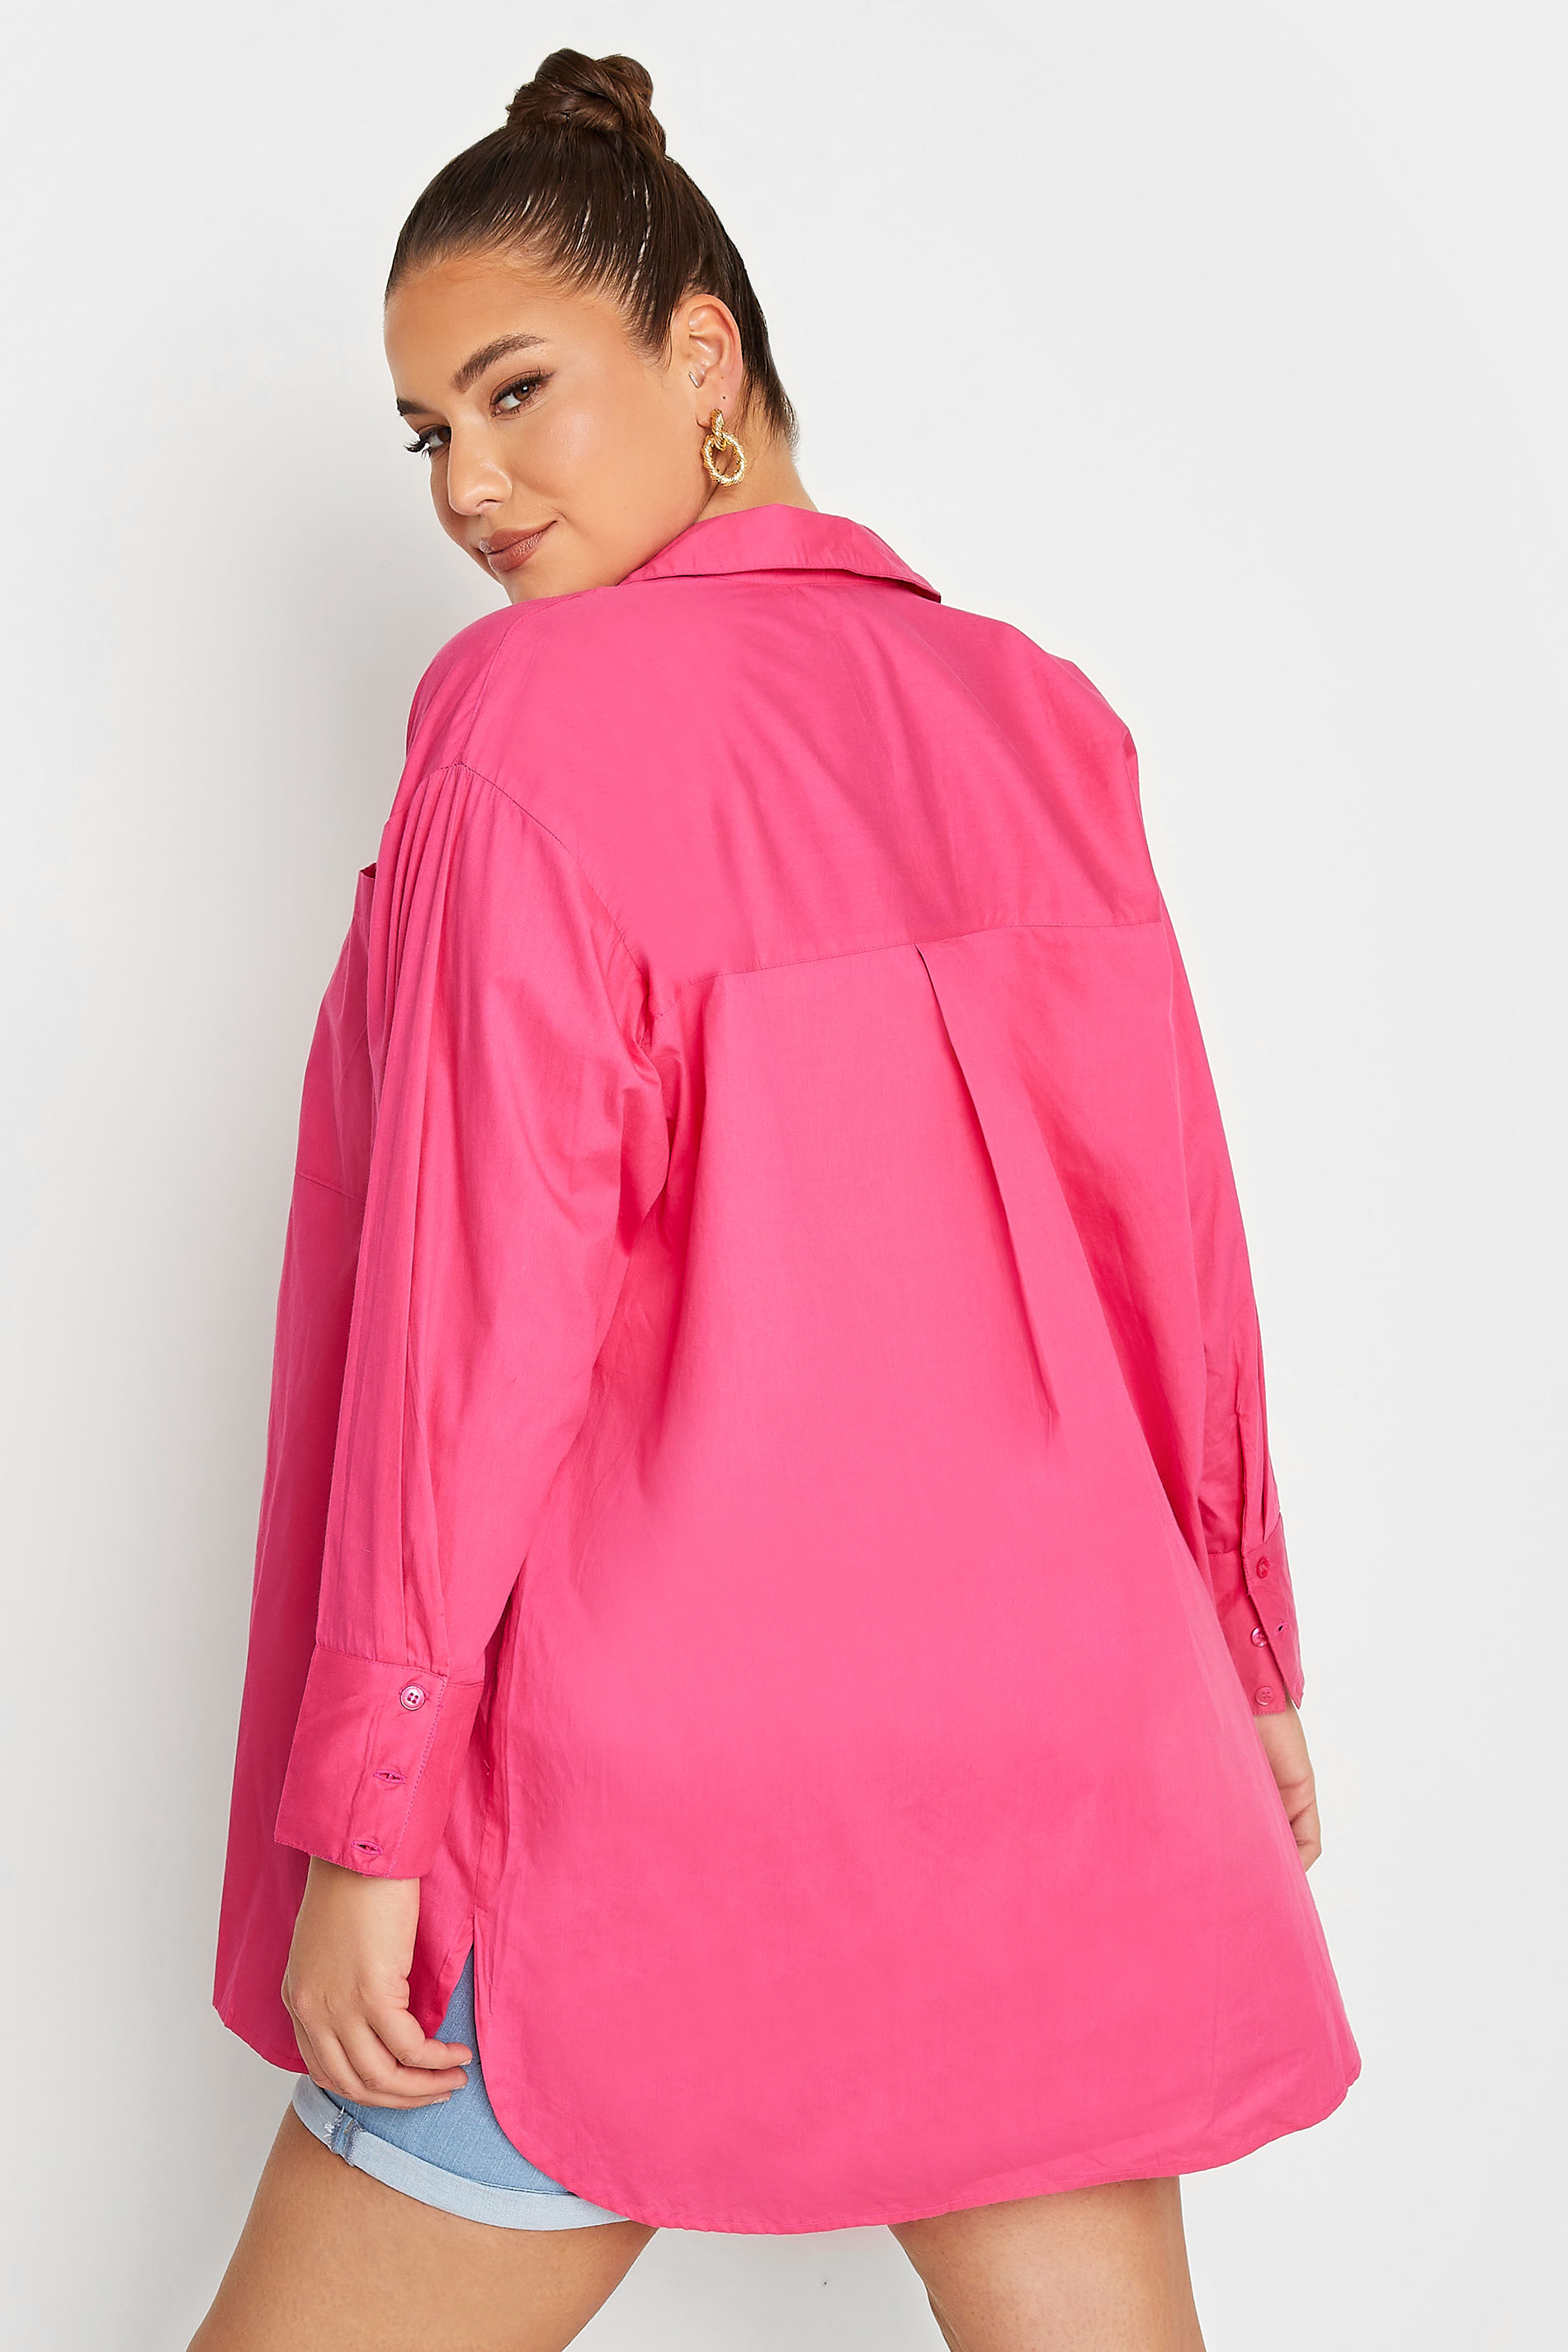 LIMITED COLLECTION Plus Size Hot Pink Oversized Boyfriend Shirt | Yours Clothing 3